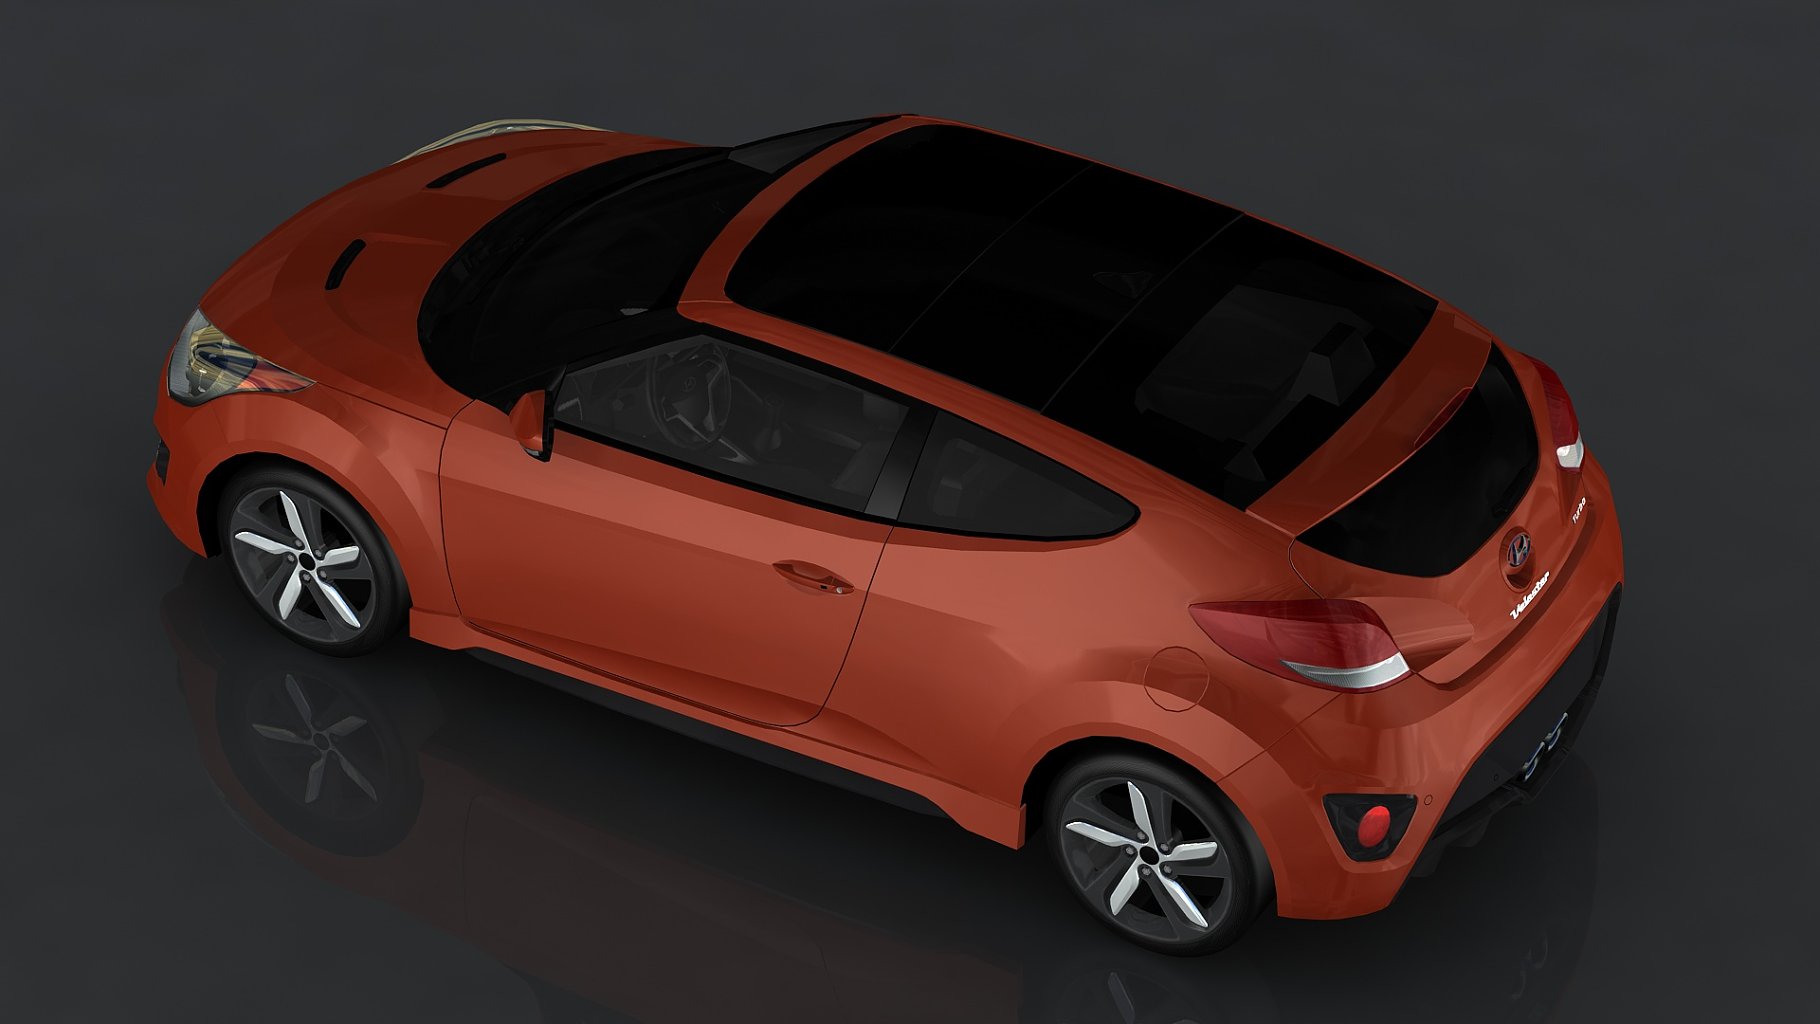 Mockup of a red car on a dark gray background from above.